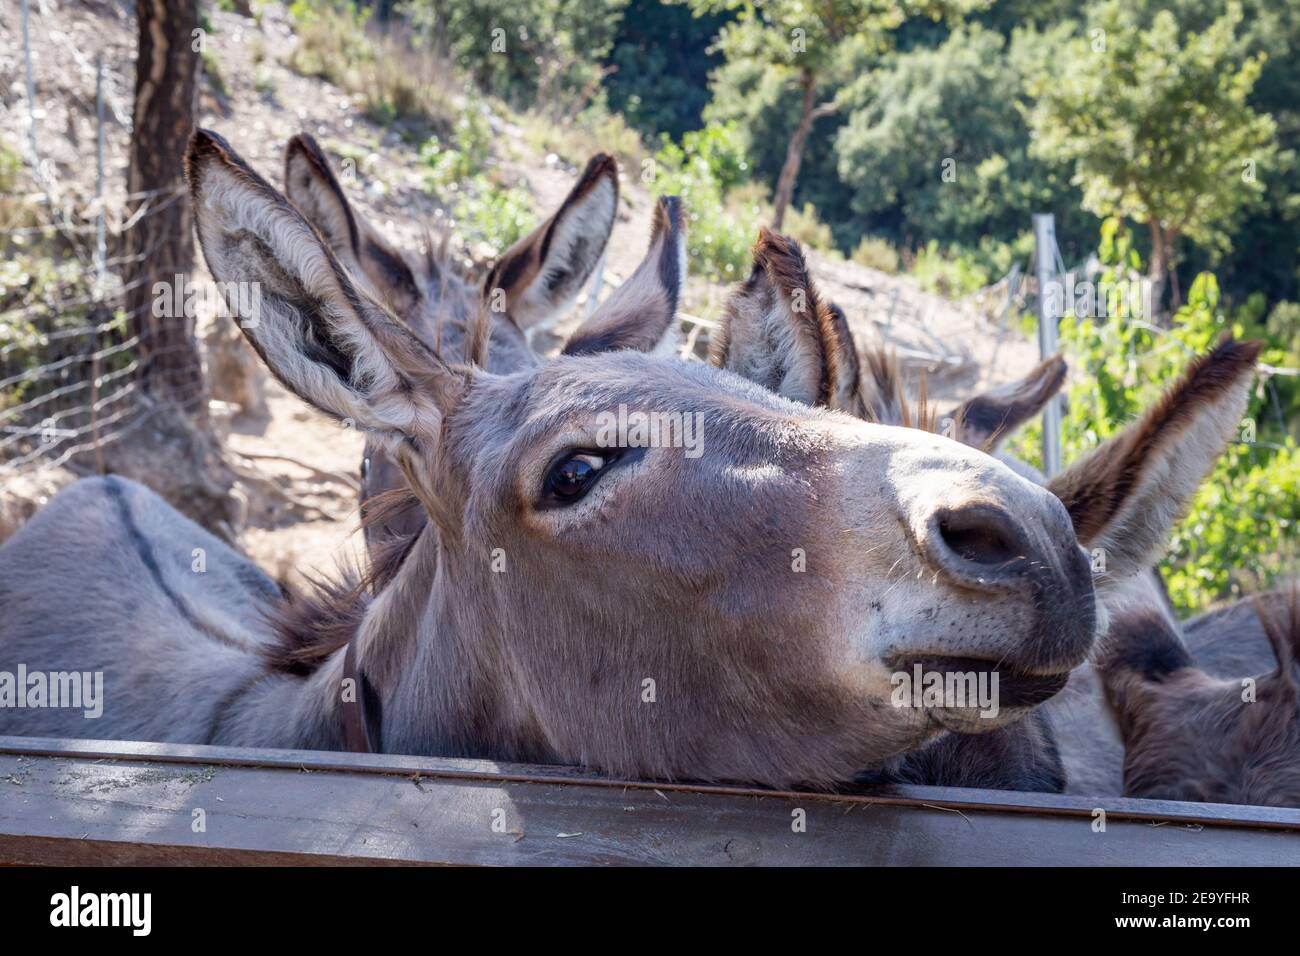 donkeys in the countryside Stock Photo